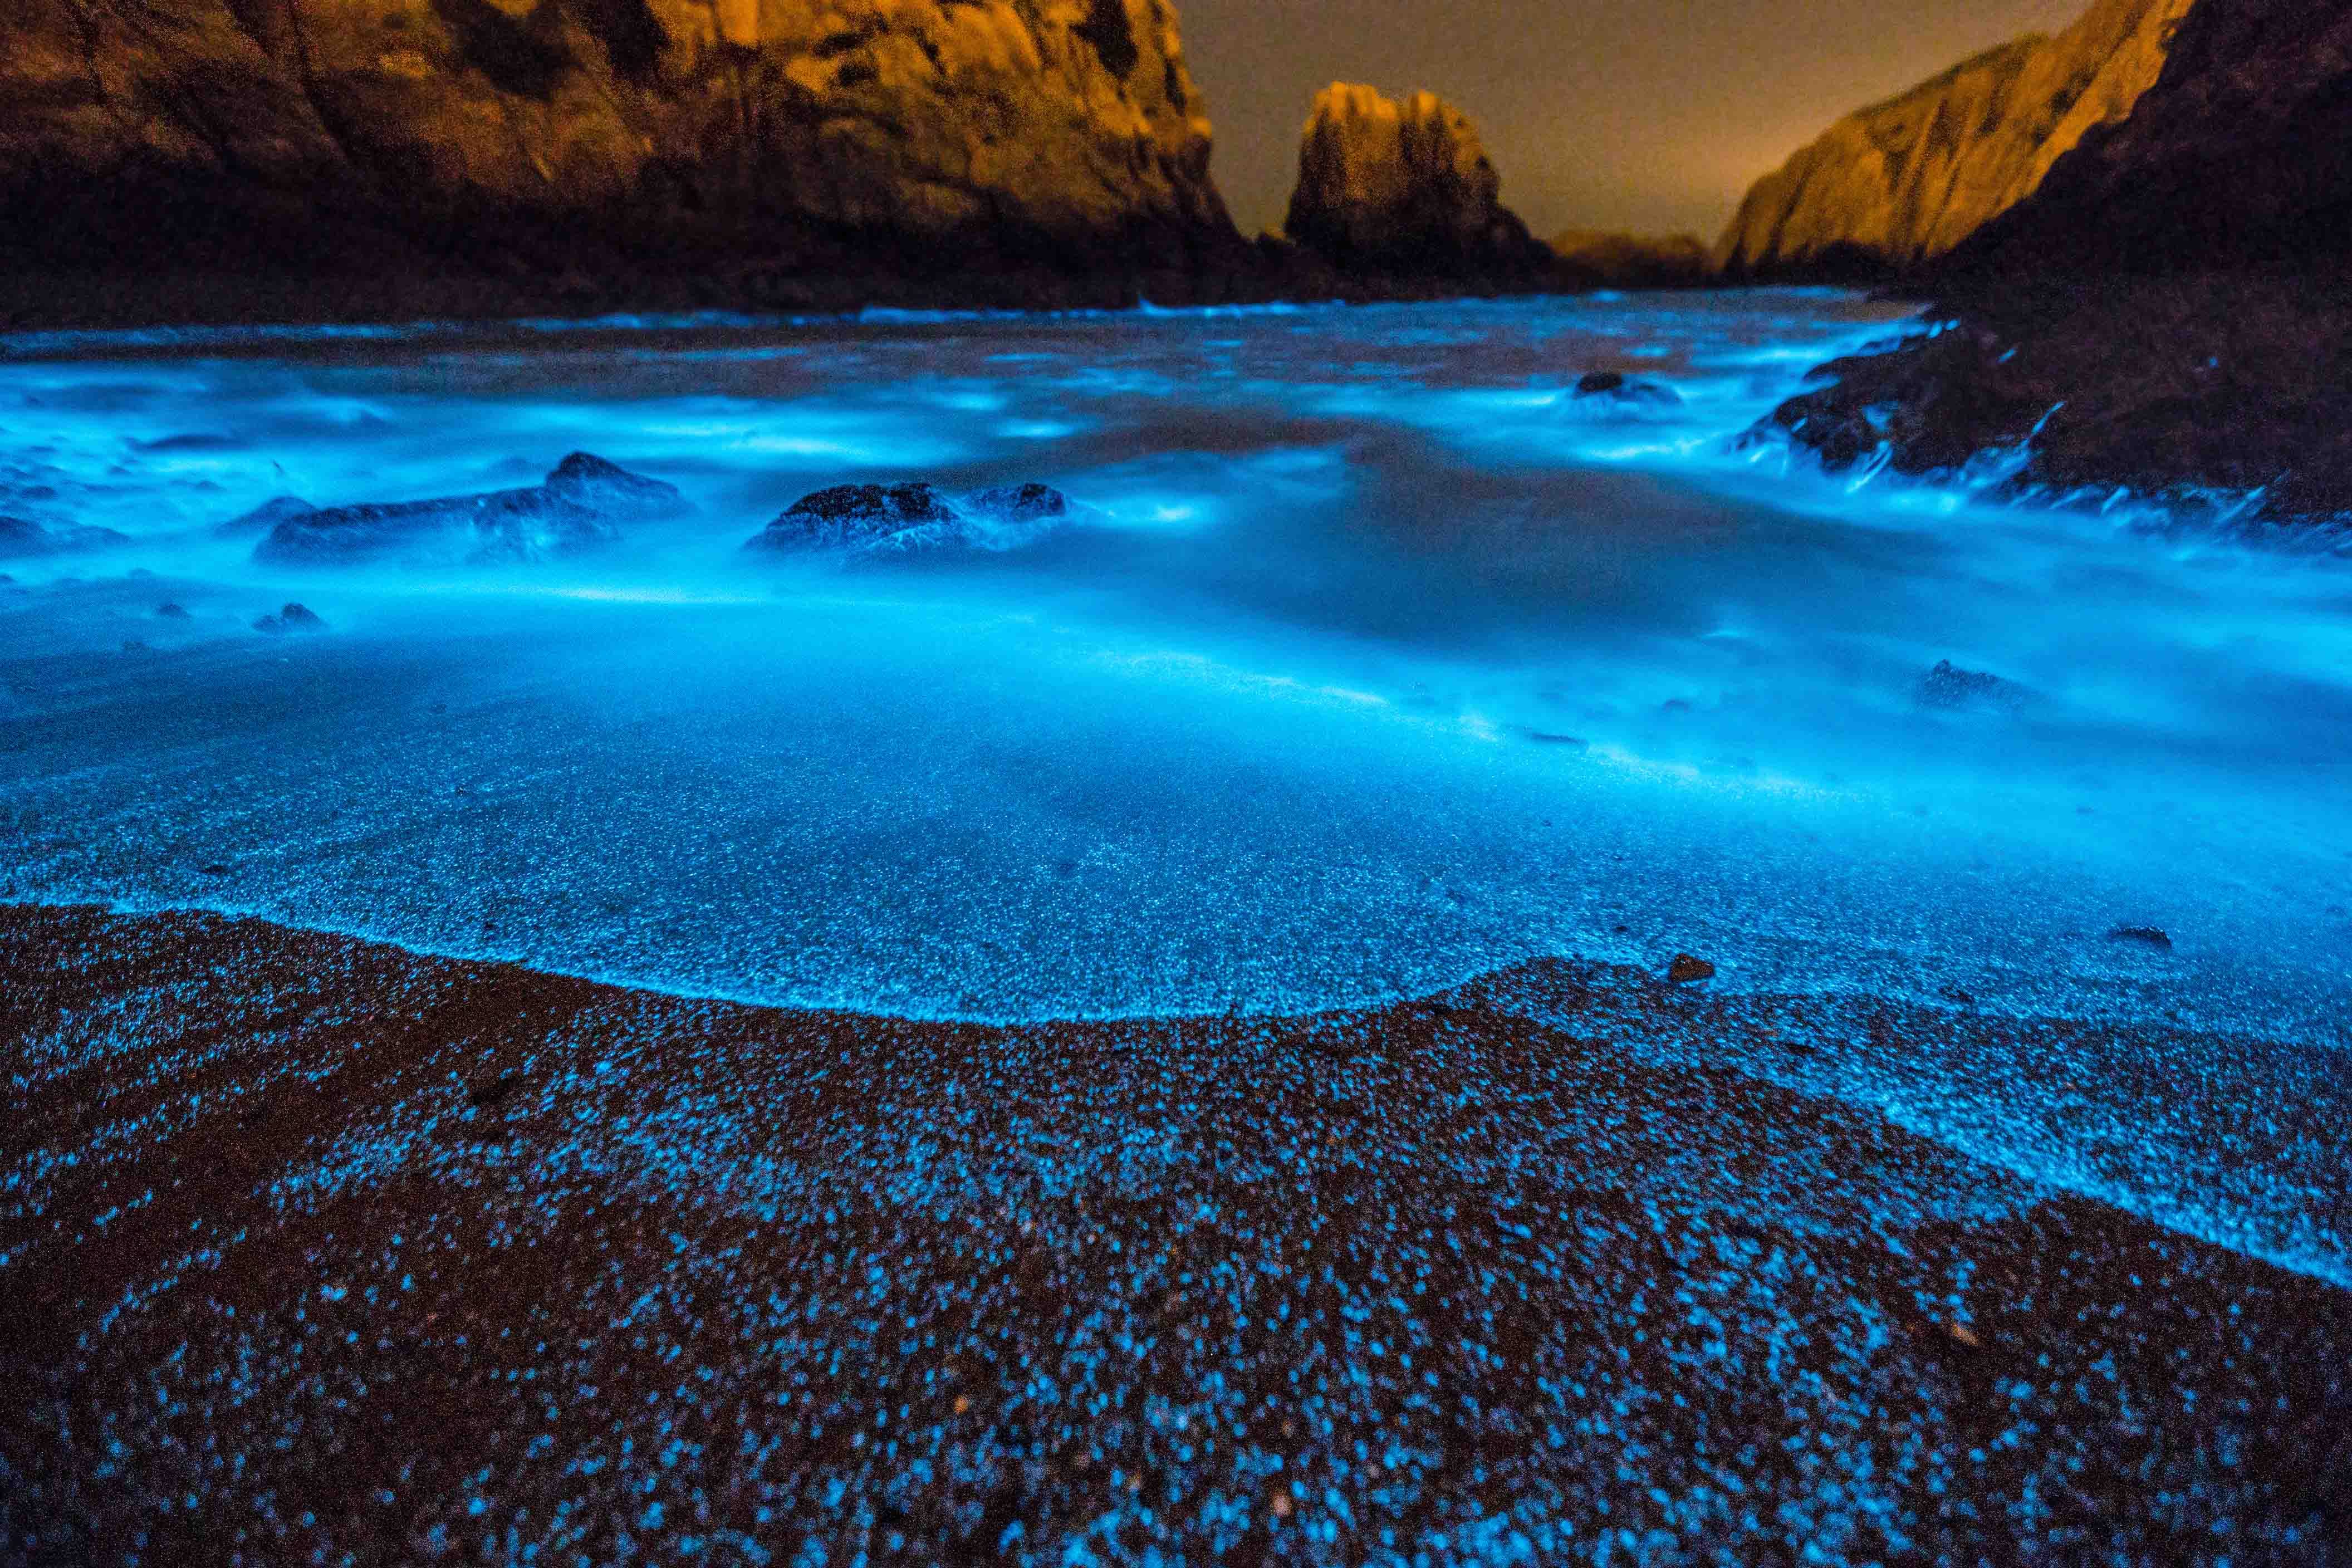 Water in the night containing beautiful Noctiluca scintillans that glows